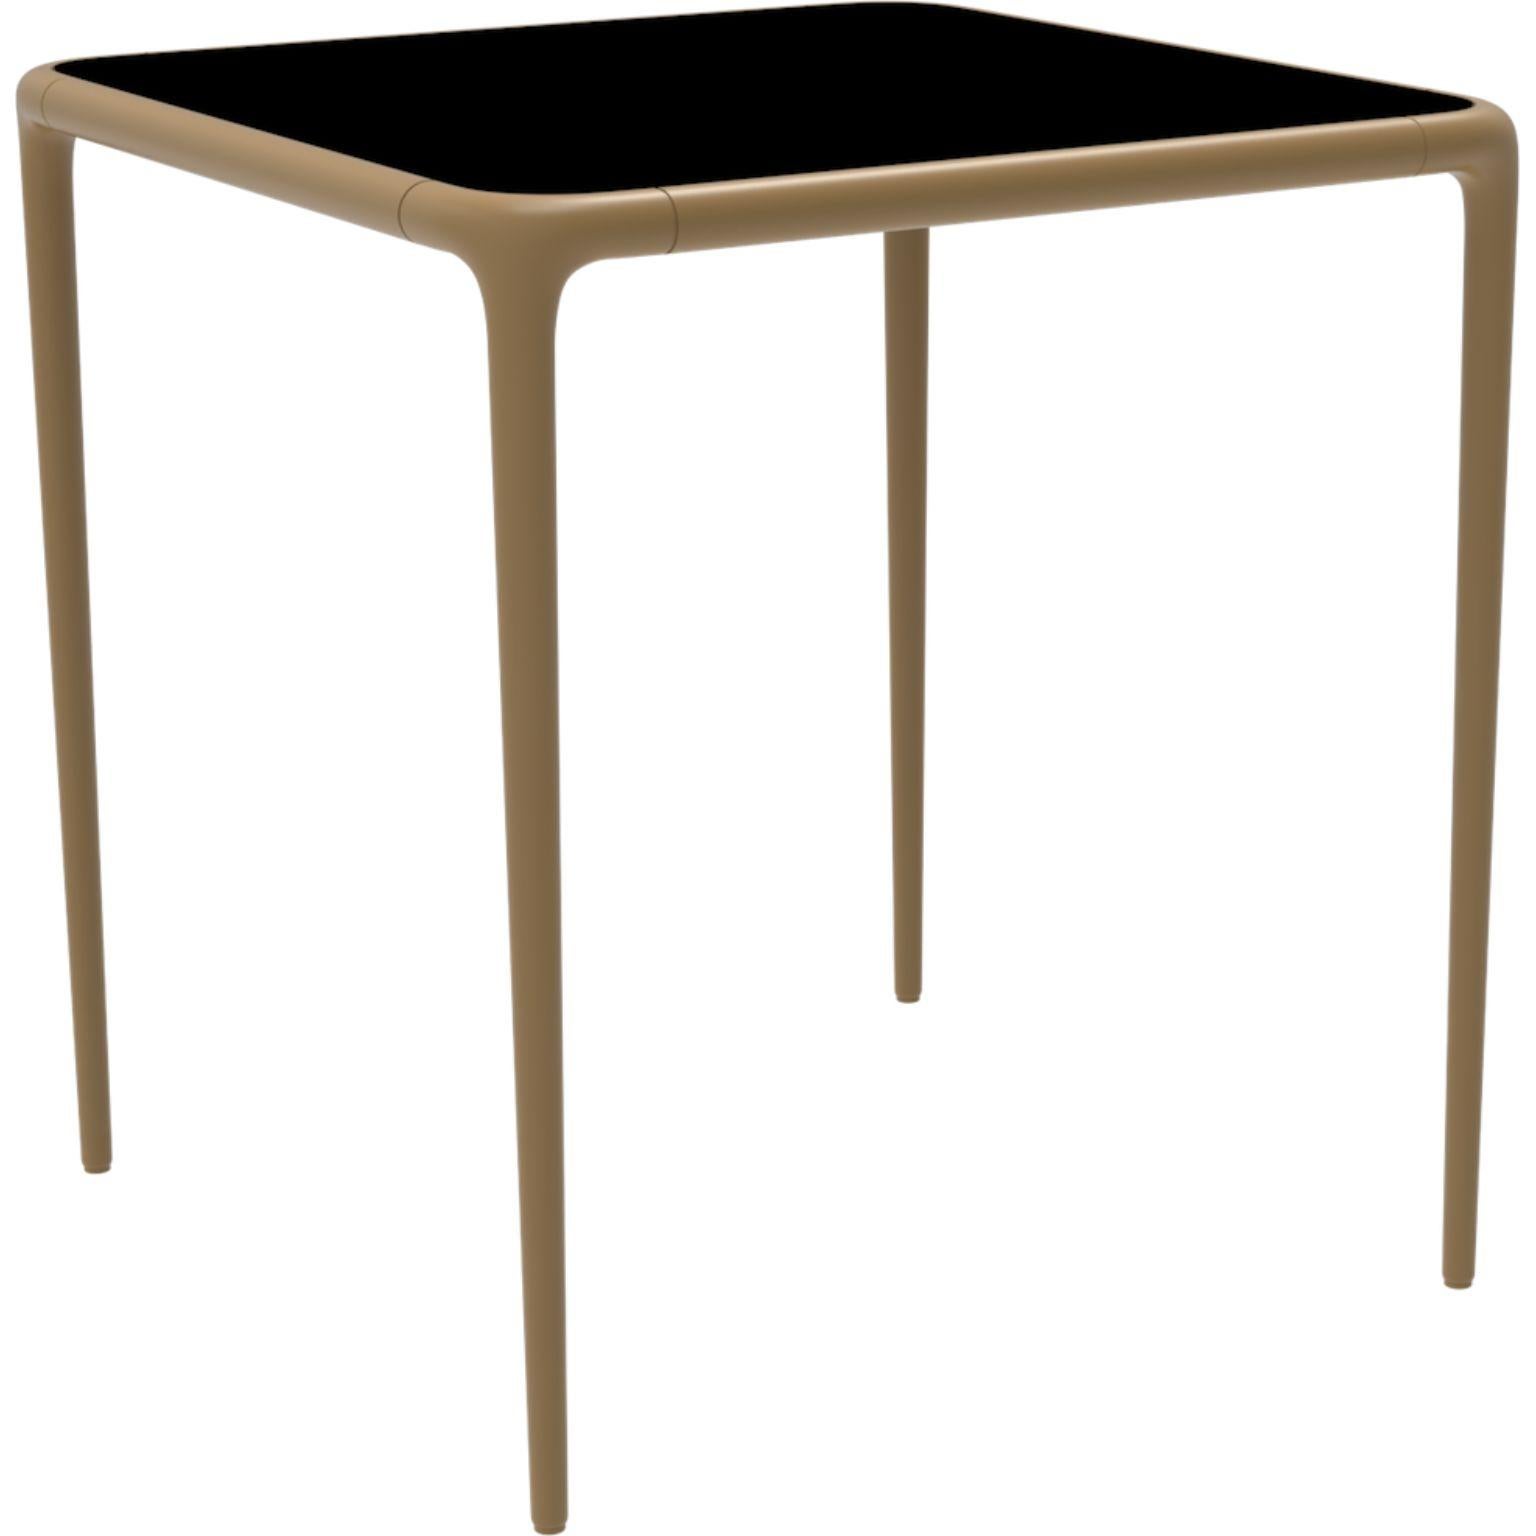 Xaloc Gold glass top table 70 by MOWEE
Dimensions: D70 x W70 x H74 cm
Material: Aluminum, tinted tempered glass top.
Also available in different aluminum colors and finishes (HPL Black Edge or Neolith). 

Xaloc synthesizes the lines of interior